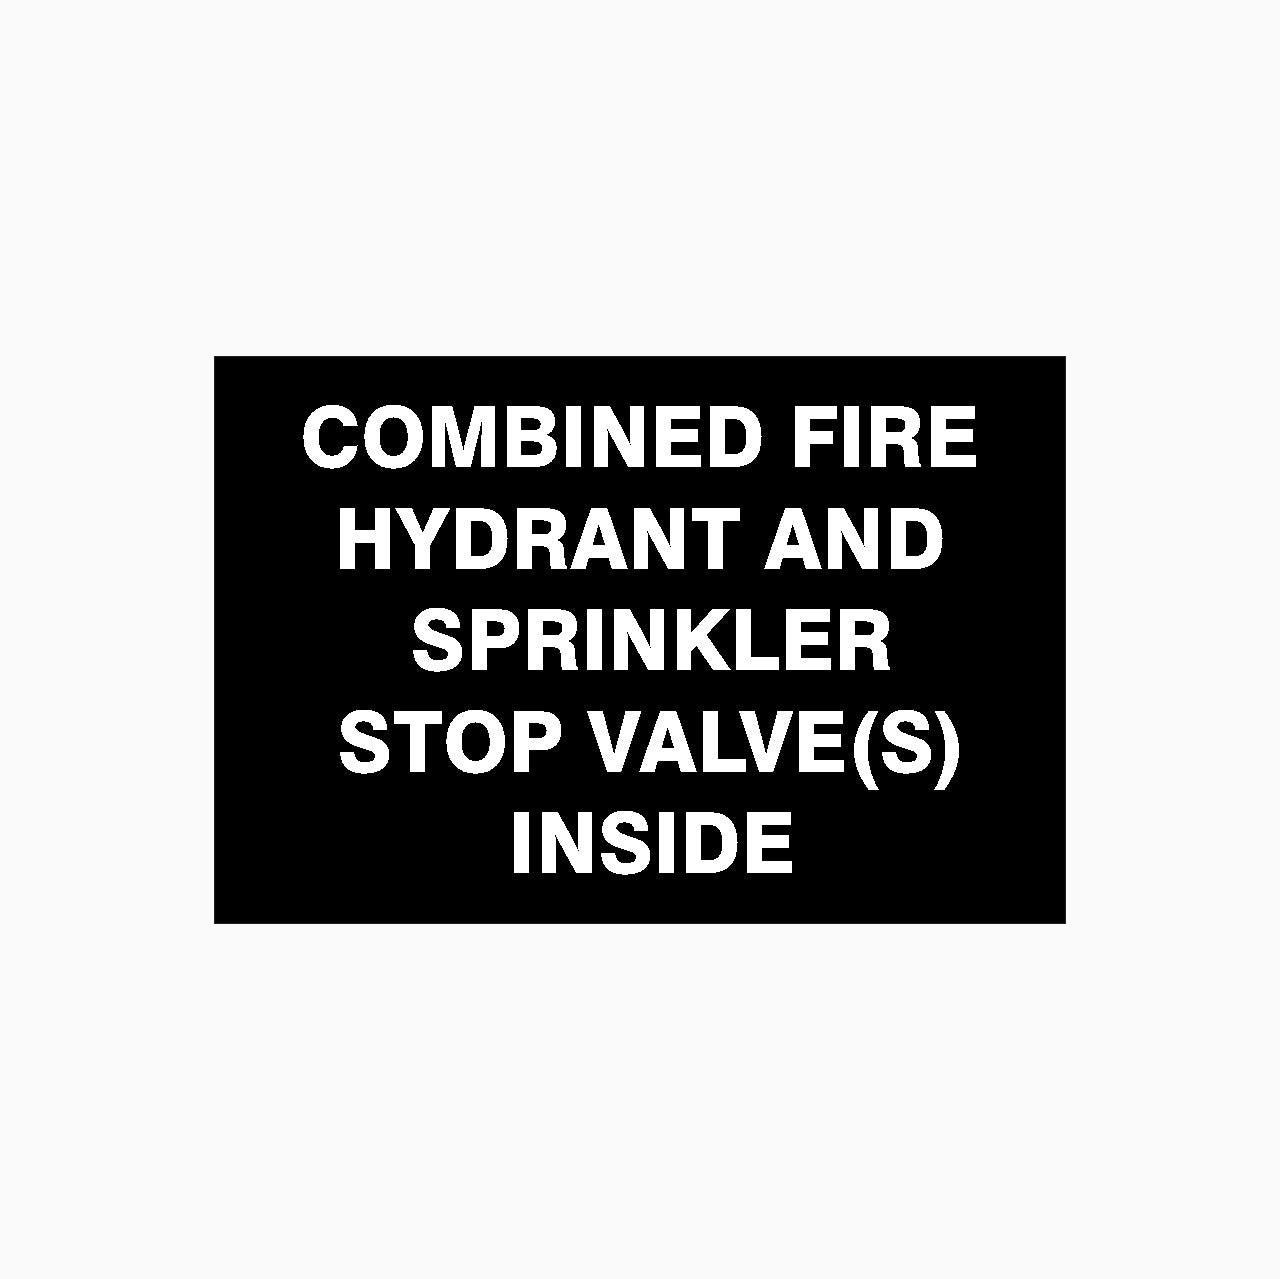 COMBINED FIRE HYDRANT AND SPRINKLER STOP VALVE(S) INSIDE SIGN